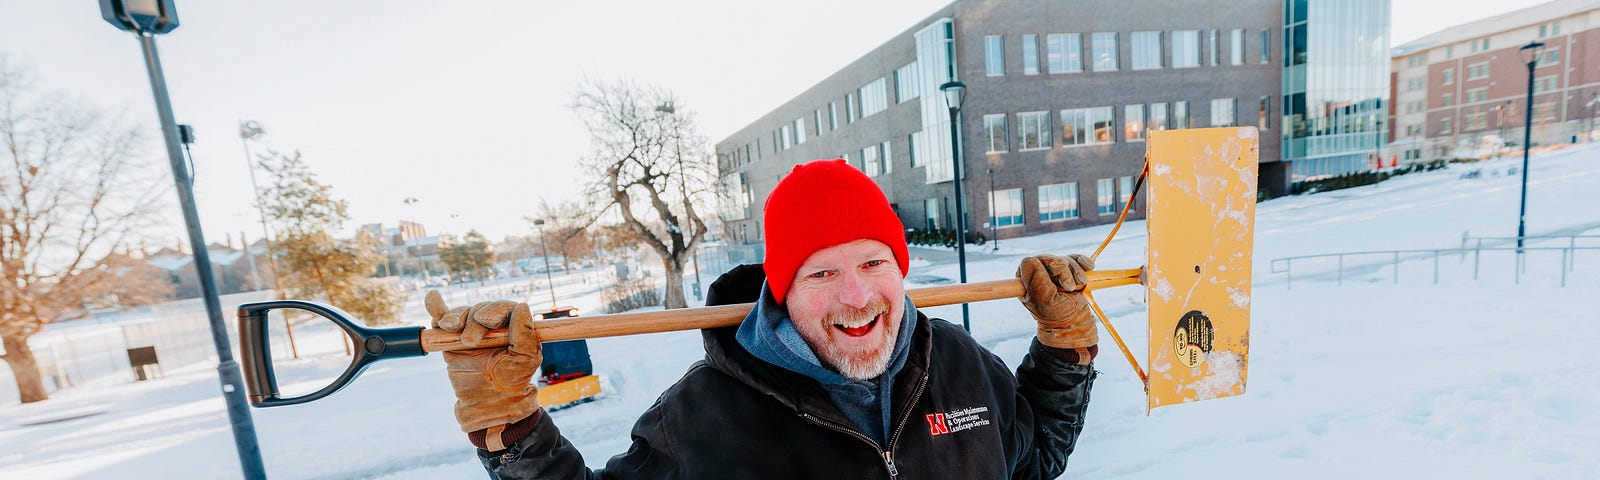 Kevin smiles for a photo while he holds a snow shovel across his shoulders